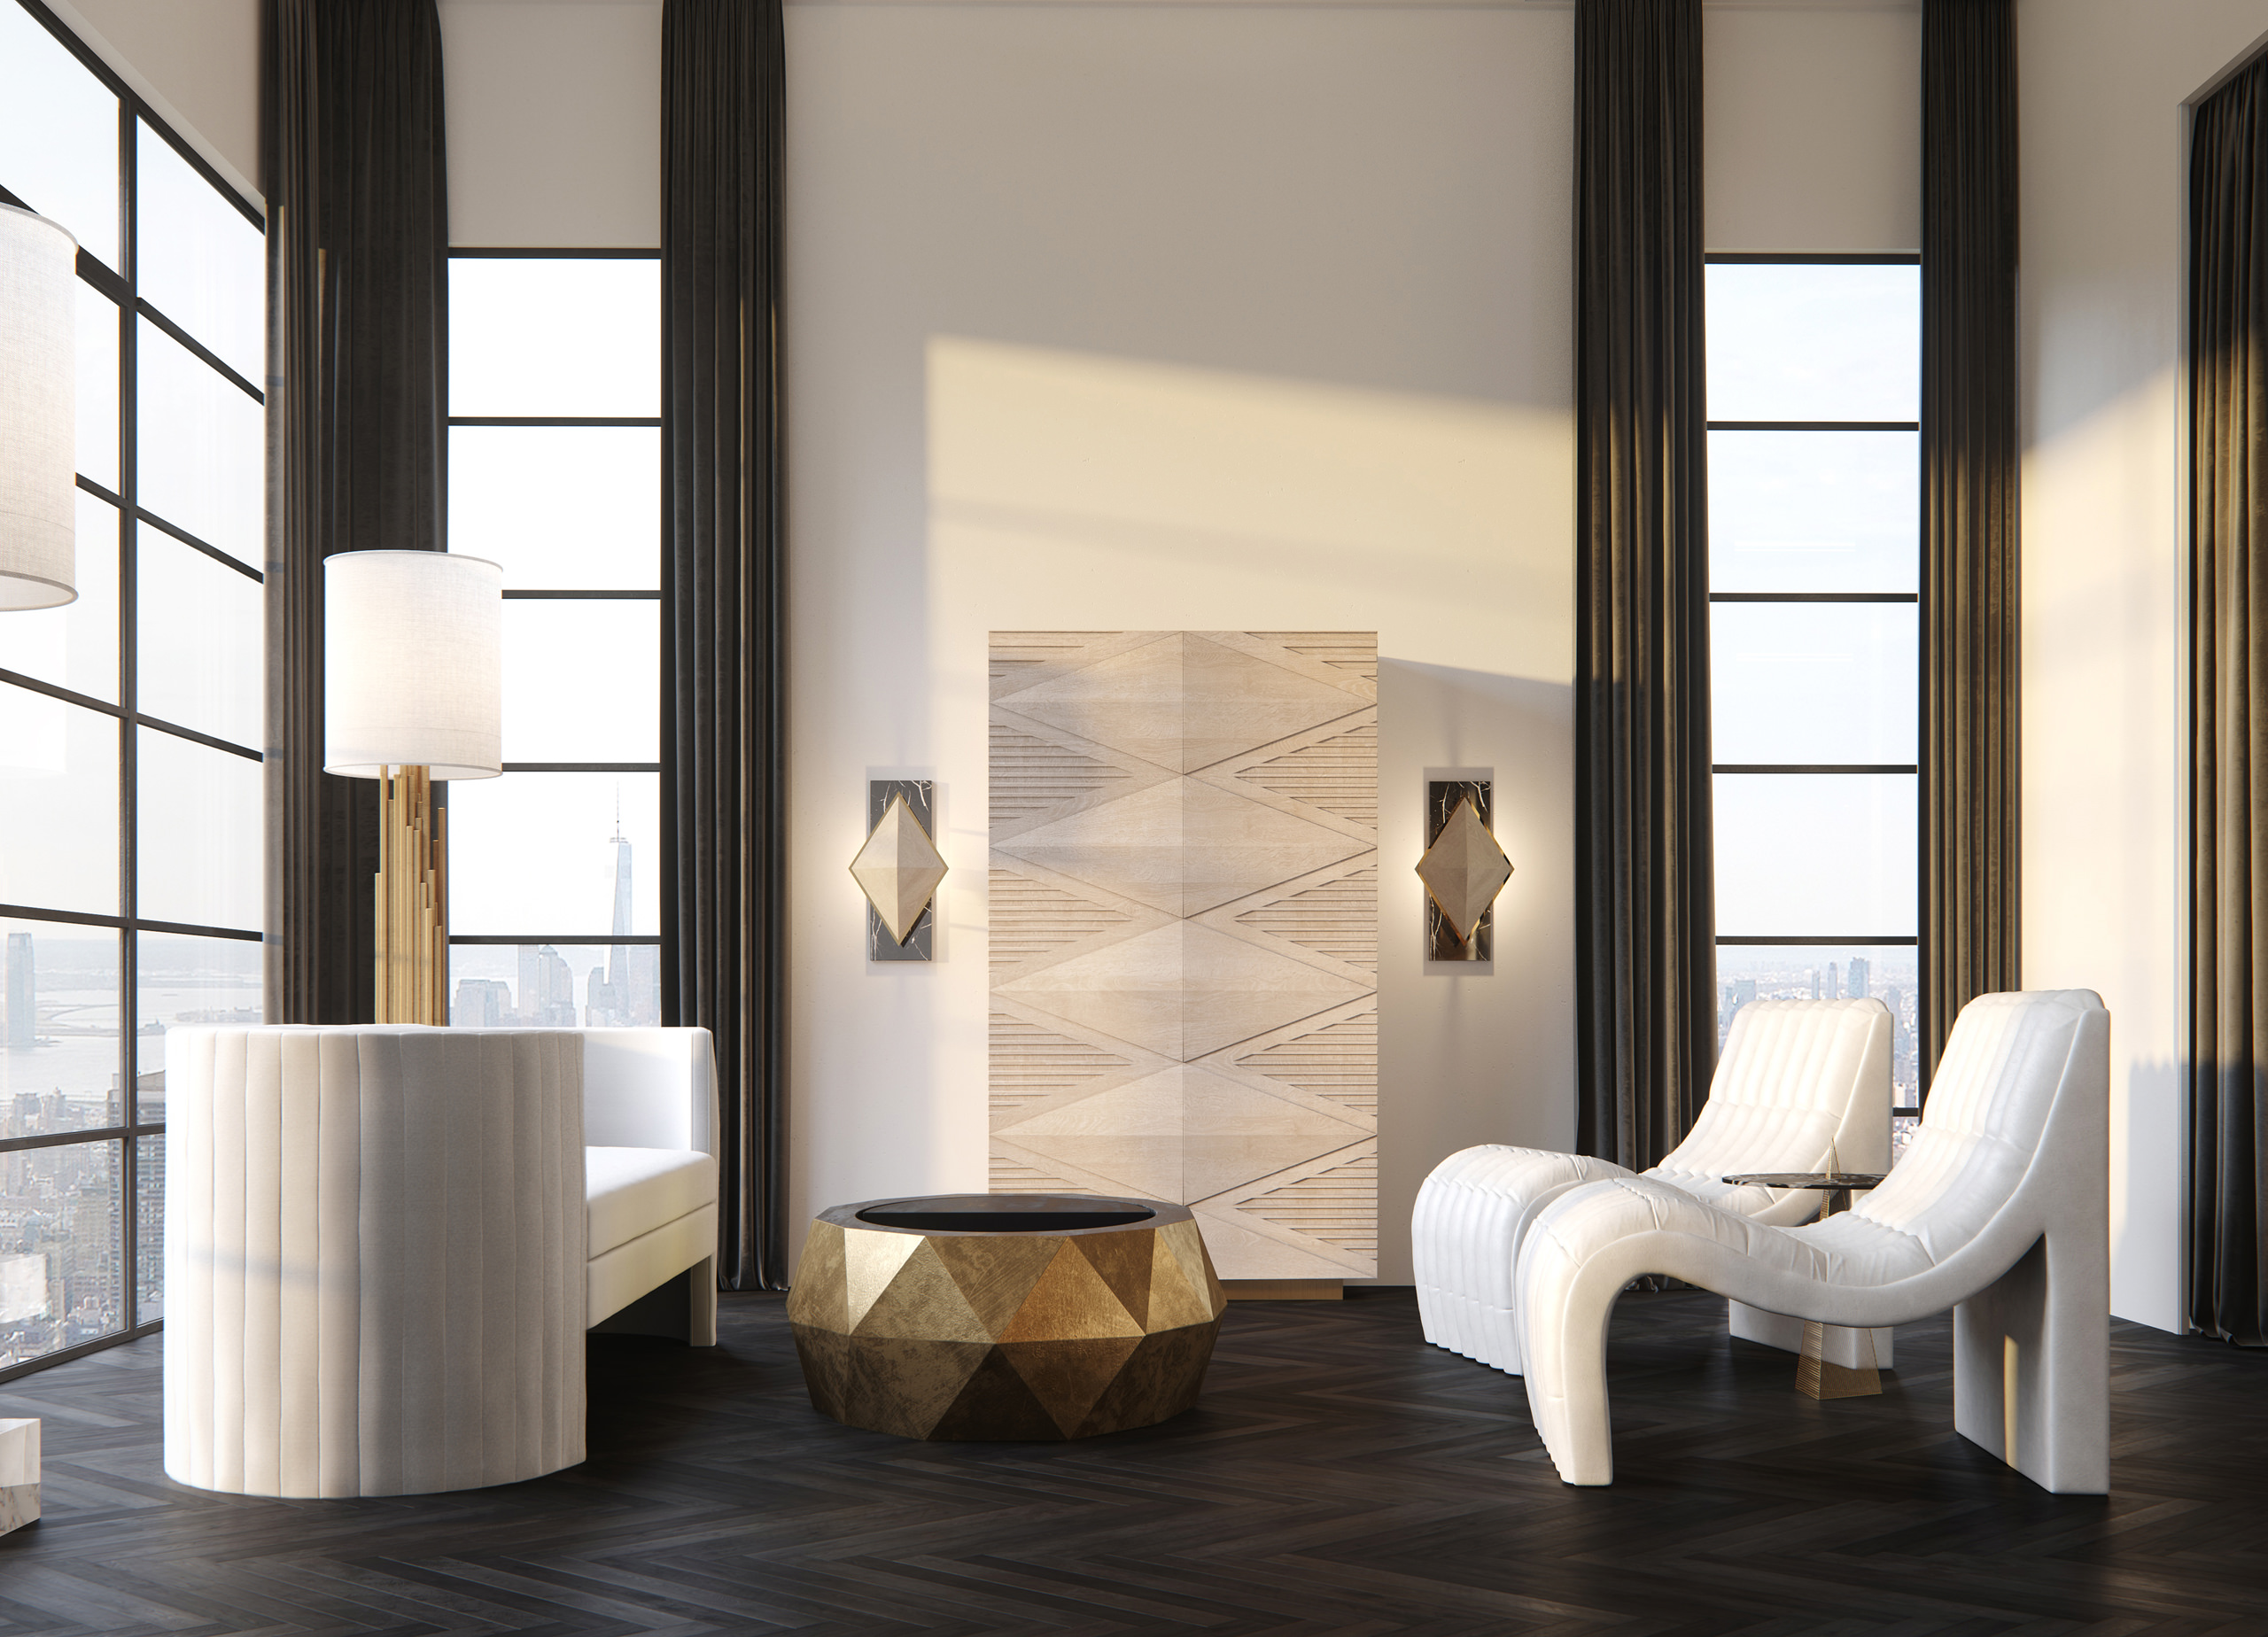 3D interior render of a New Tork show-room with floor-to-ceiling windows, curved artsy leather armchairs, white suede sofa and a diamond-shaped golden table in between them